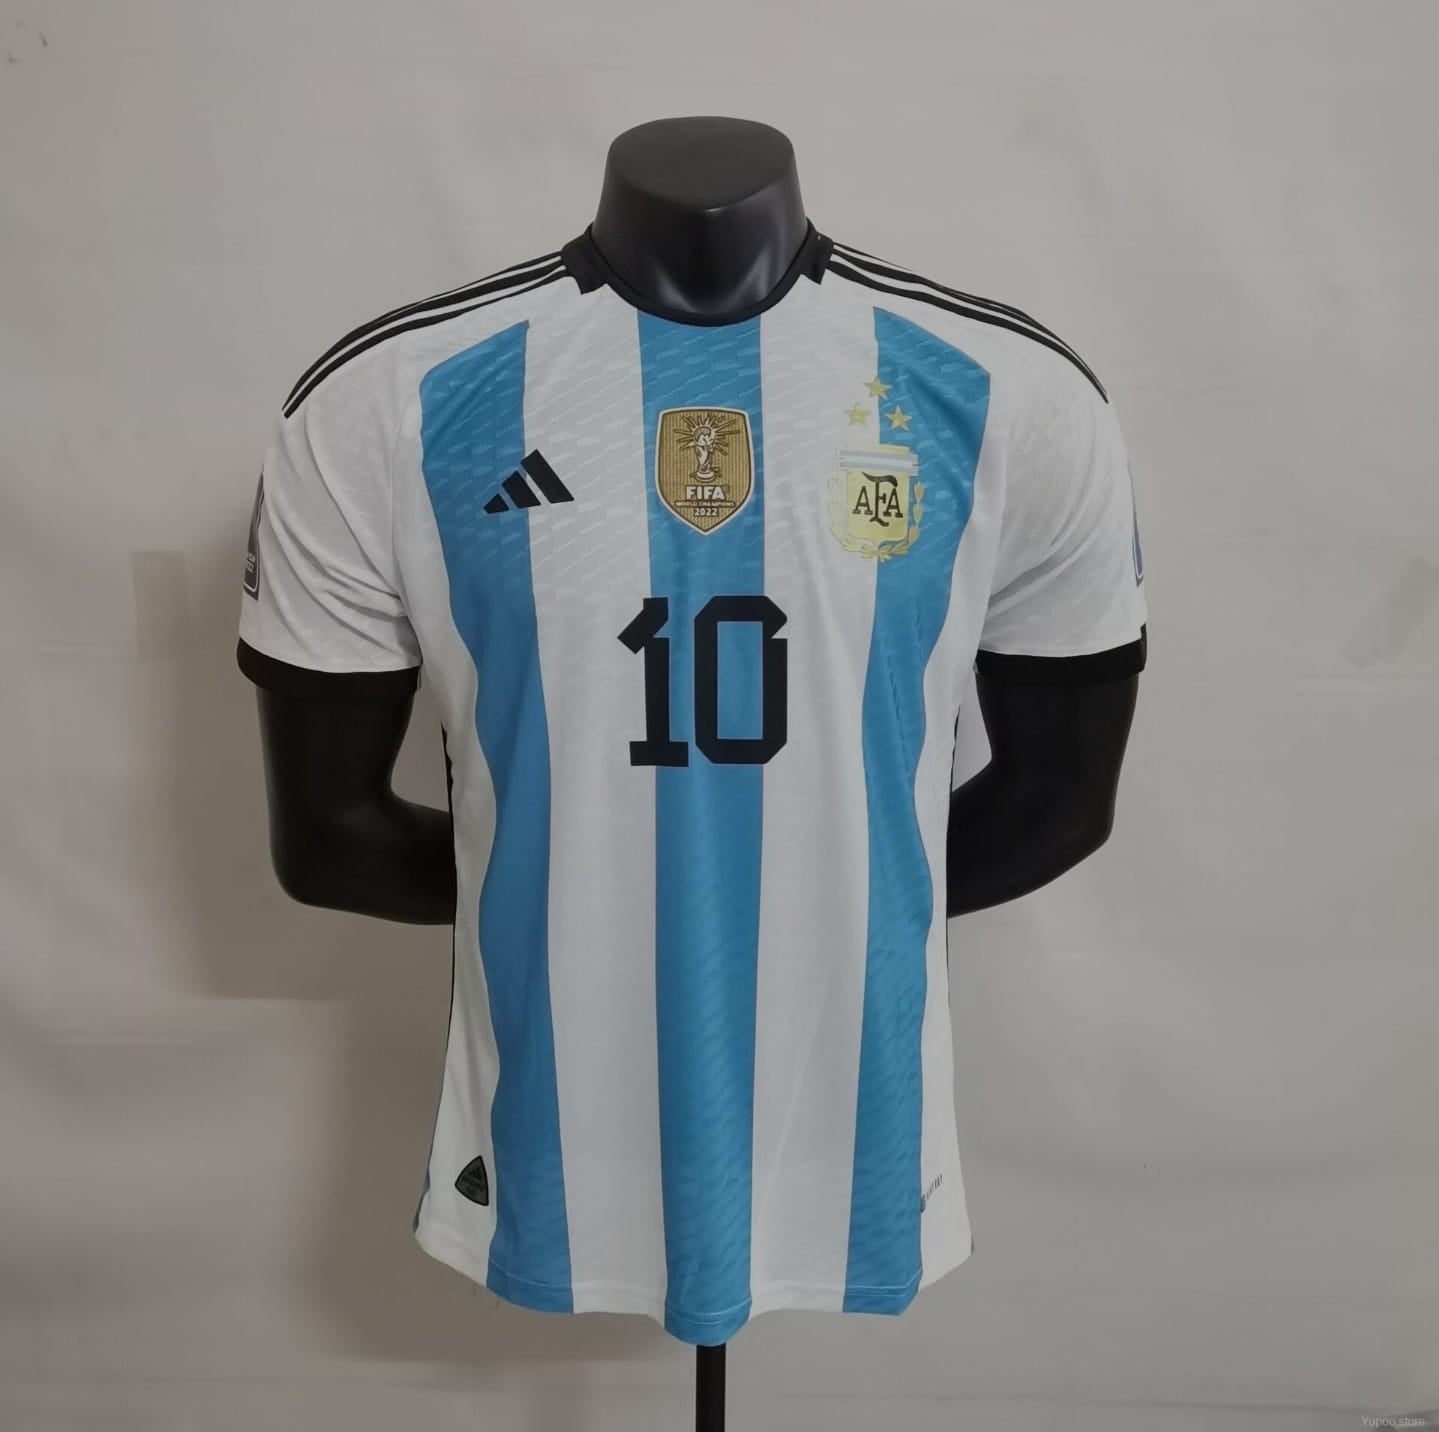 Argentina world cup winner Jersey with 3 star patches